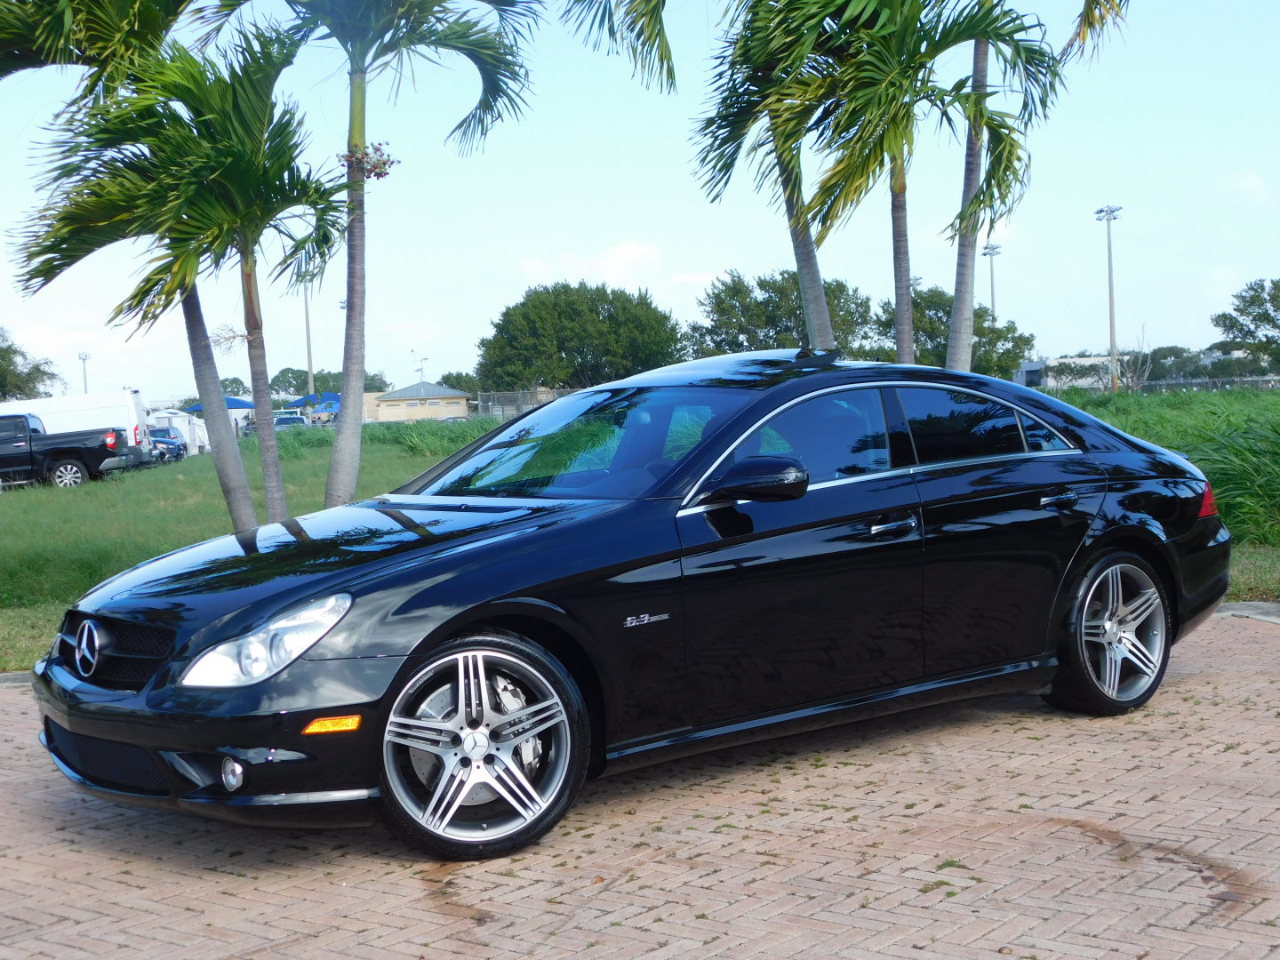 Used 2009 Mercedes-Benz CLS-Class CLS63 AMG for Sale in ...